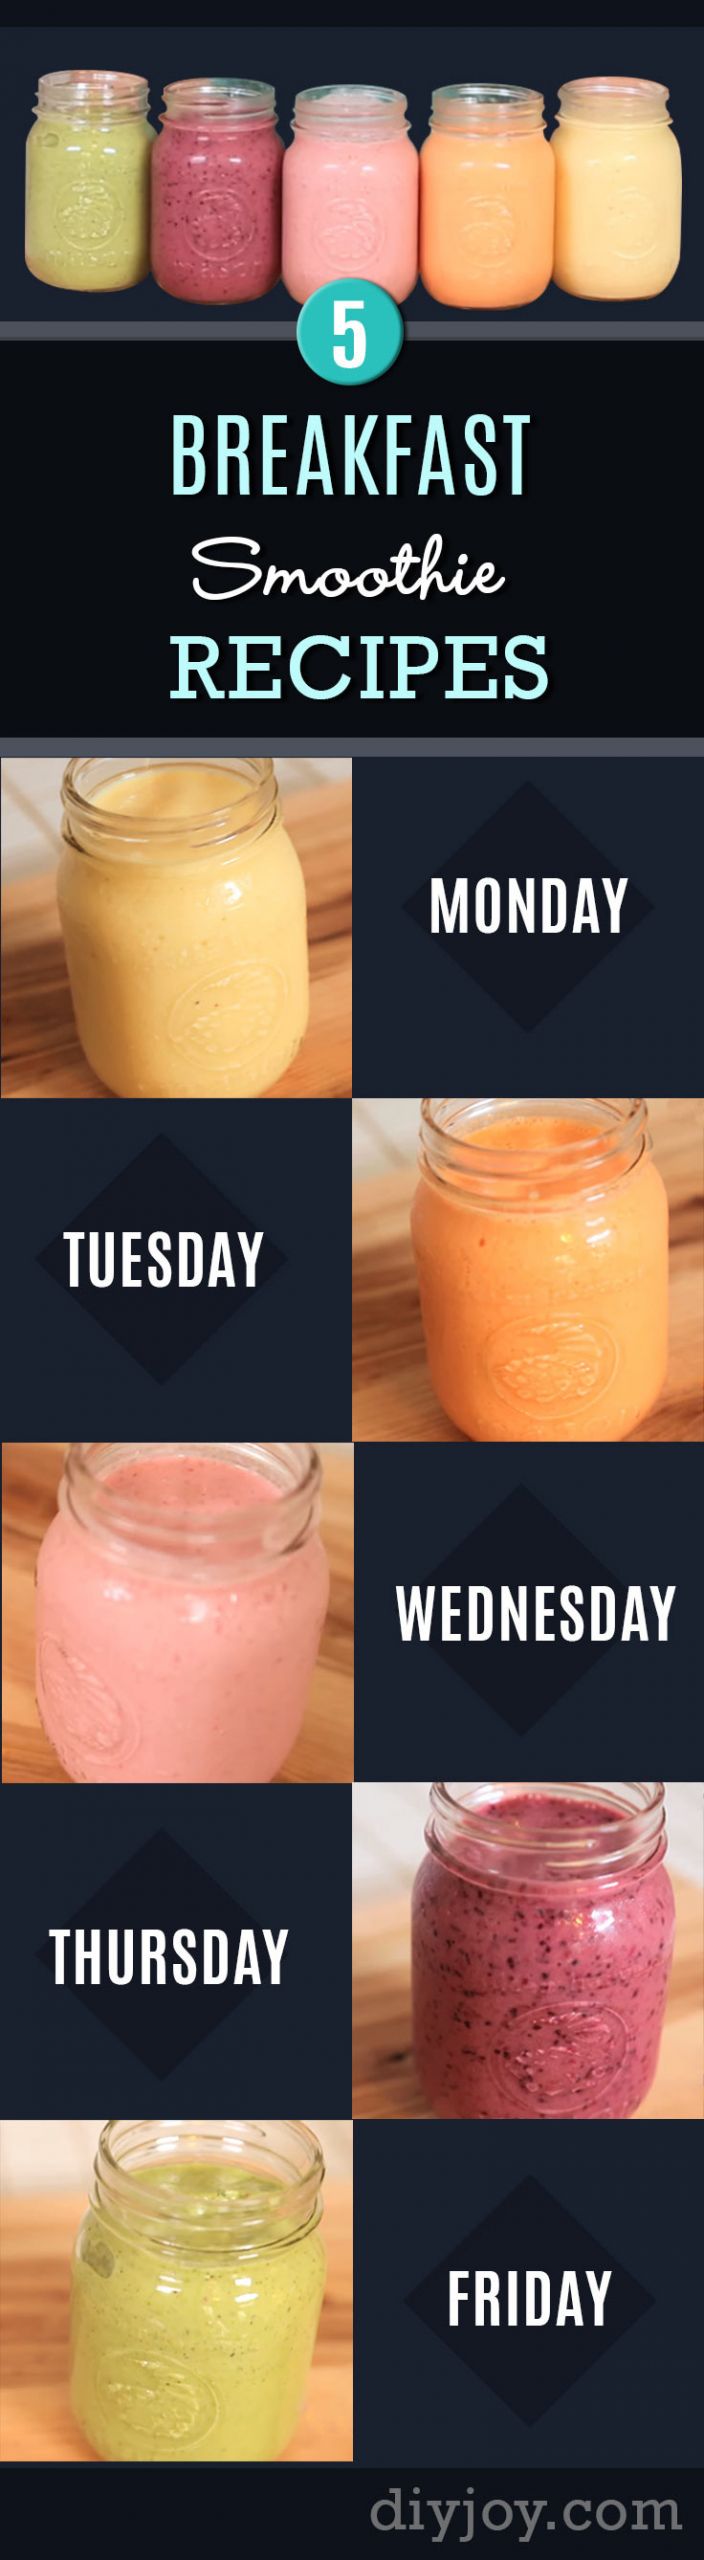 Low Calorie Smoothie Recipes
 Monday to Friday 5 Breakfast Smoothie Recipes